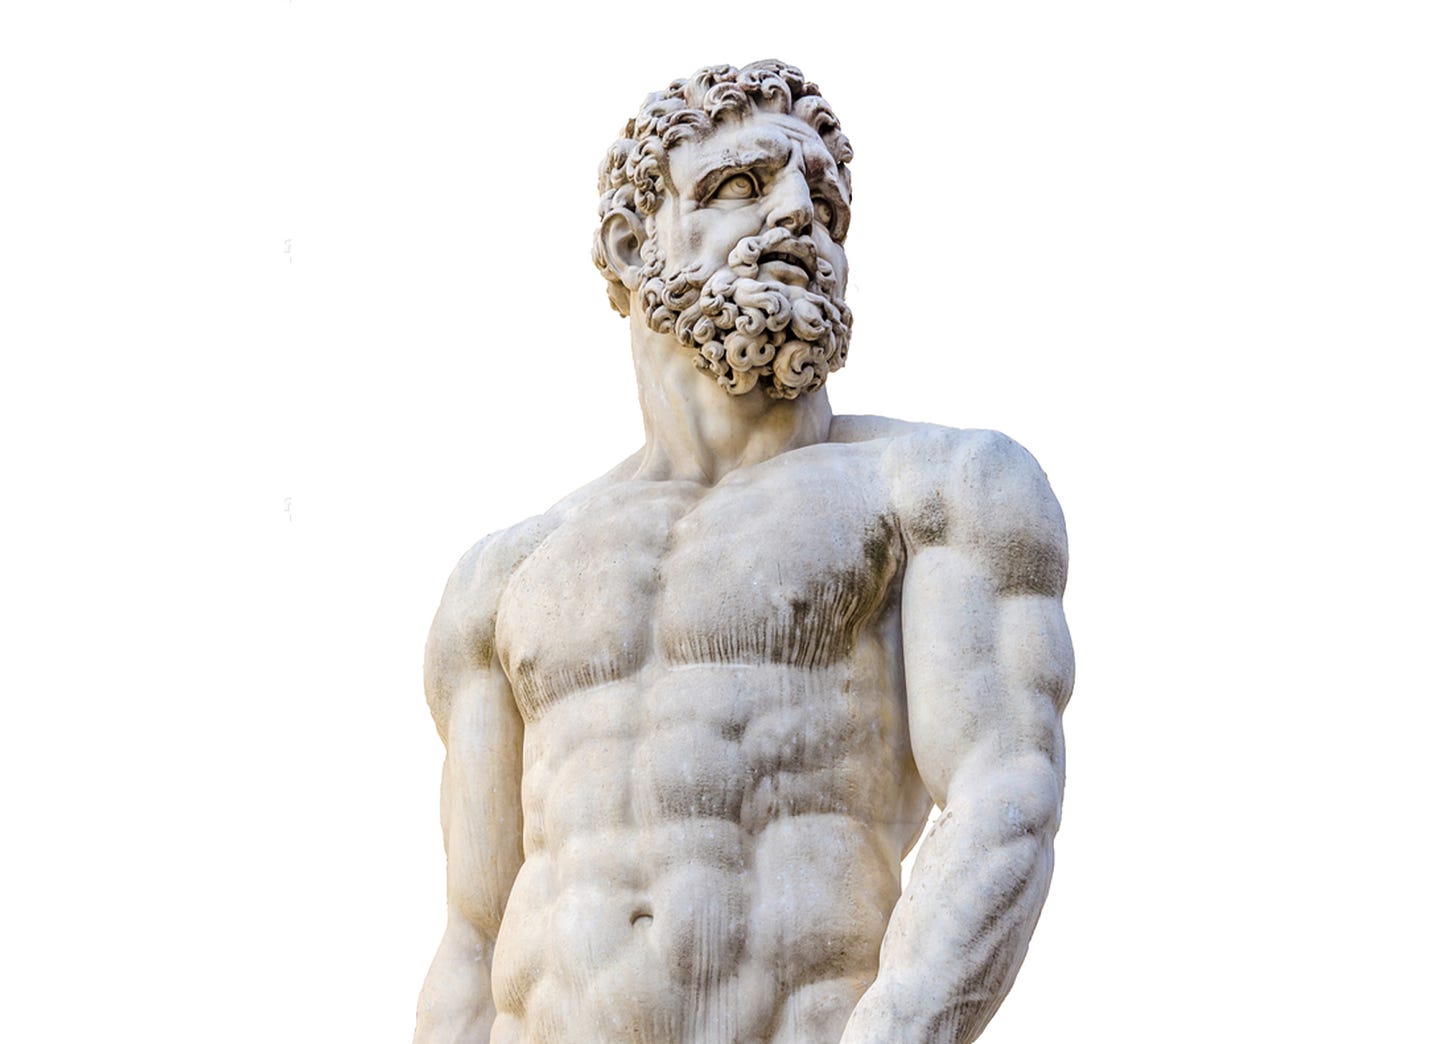 Legendary Hercules and His 12 Labors Redeemed a Hero, Totally Destroys  'Toxic Masculinity'